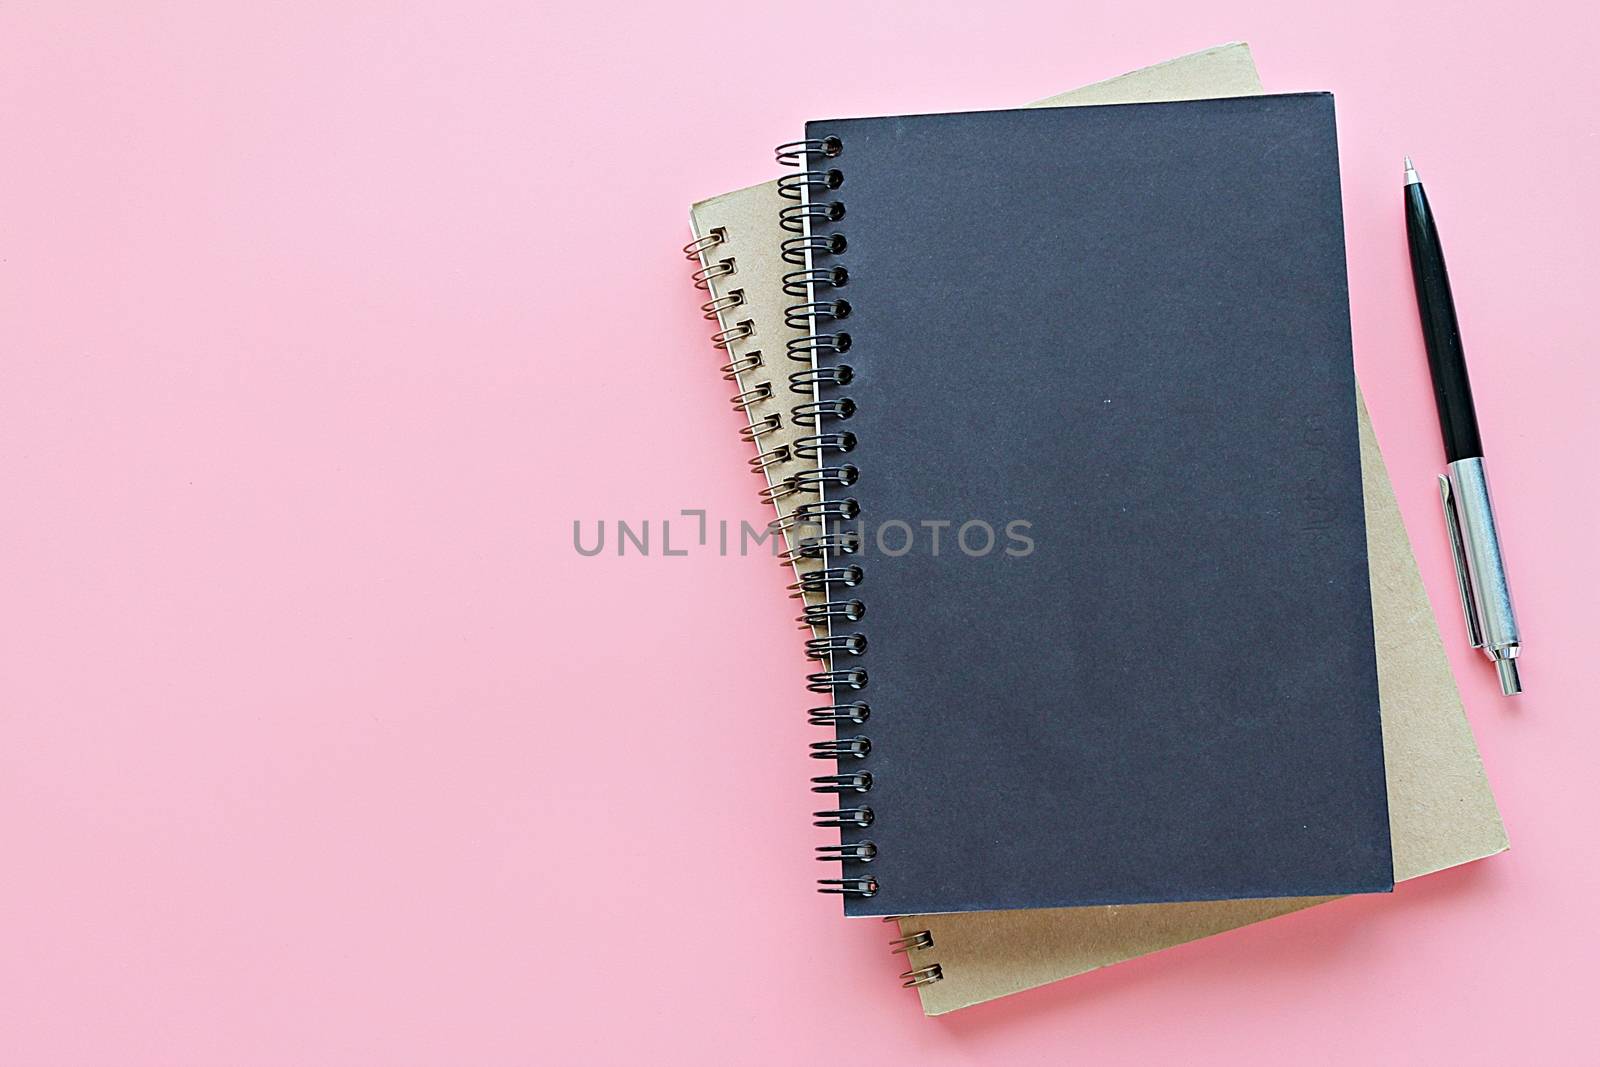 Still life, business, office supplies or education concept : Top view or flat lay of notebooks and pen on pink background, ready for adding or mock up